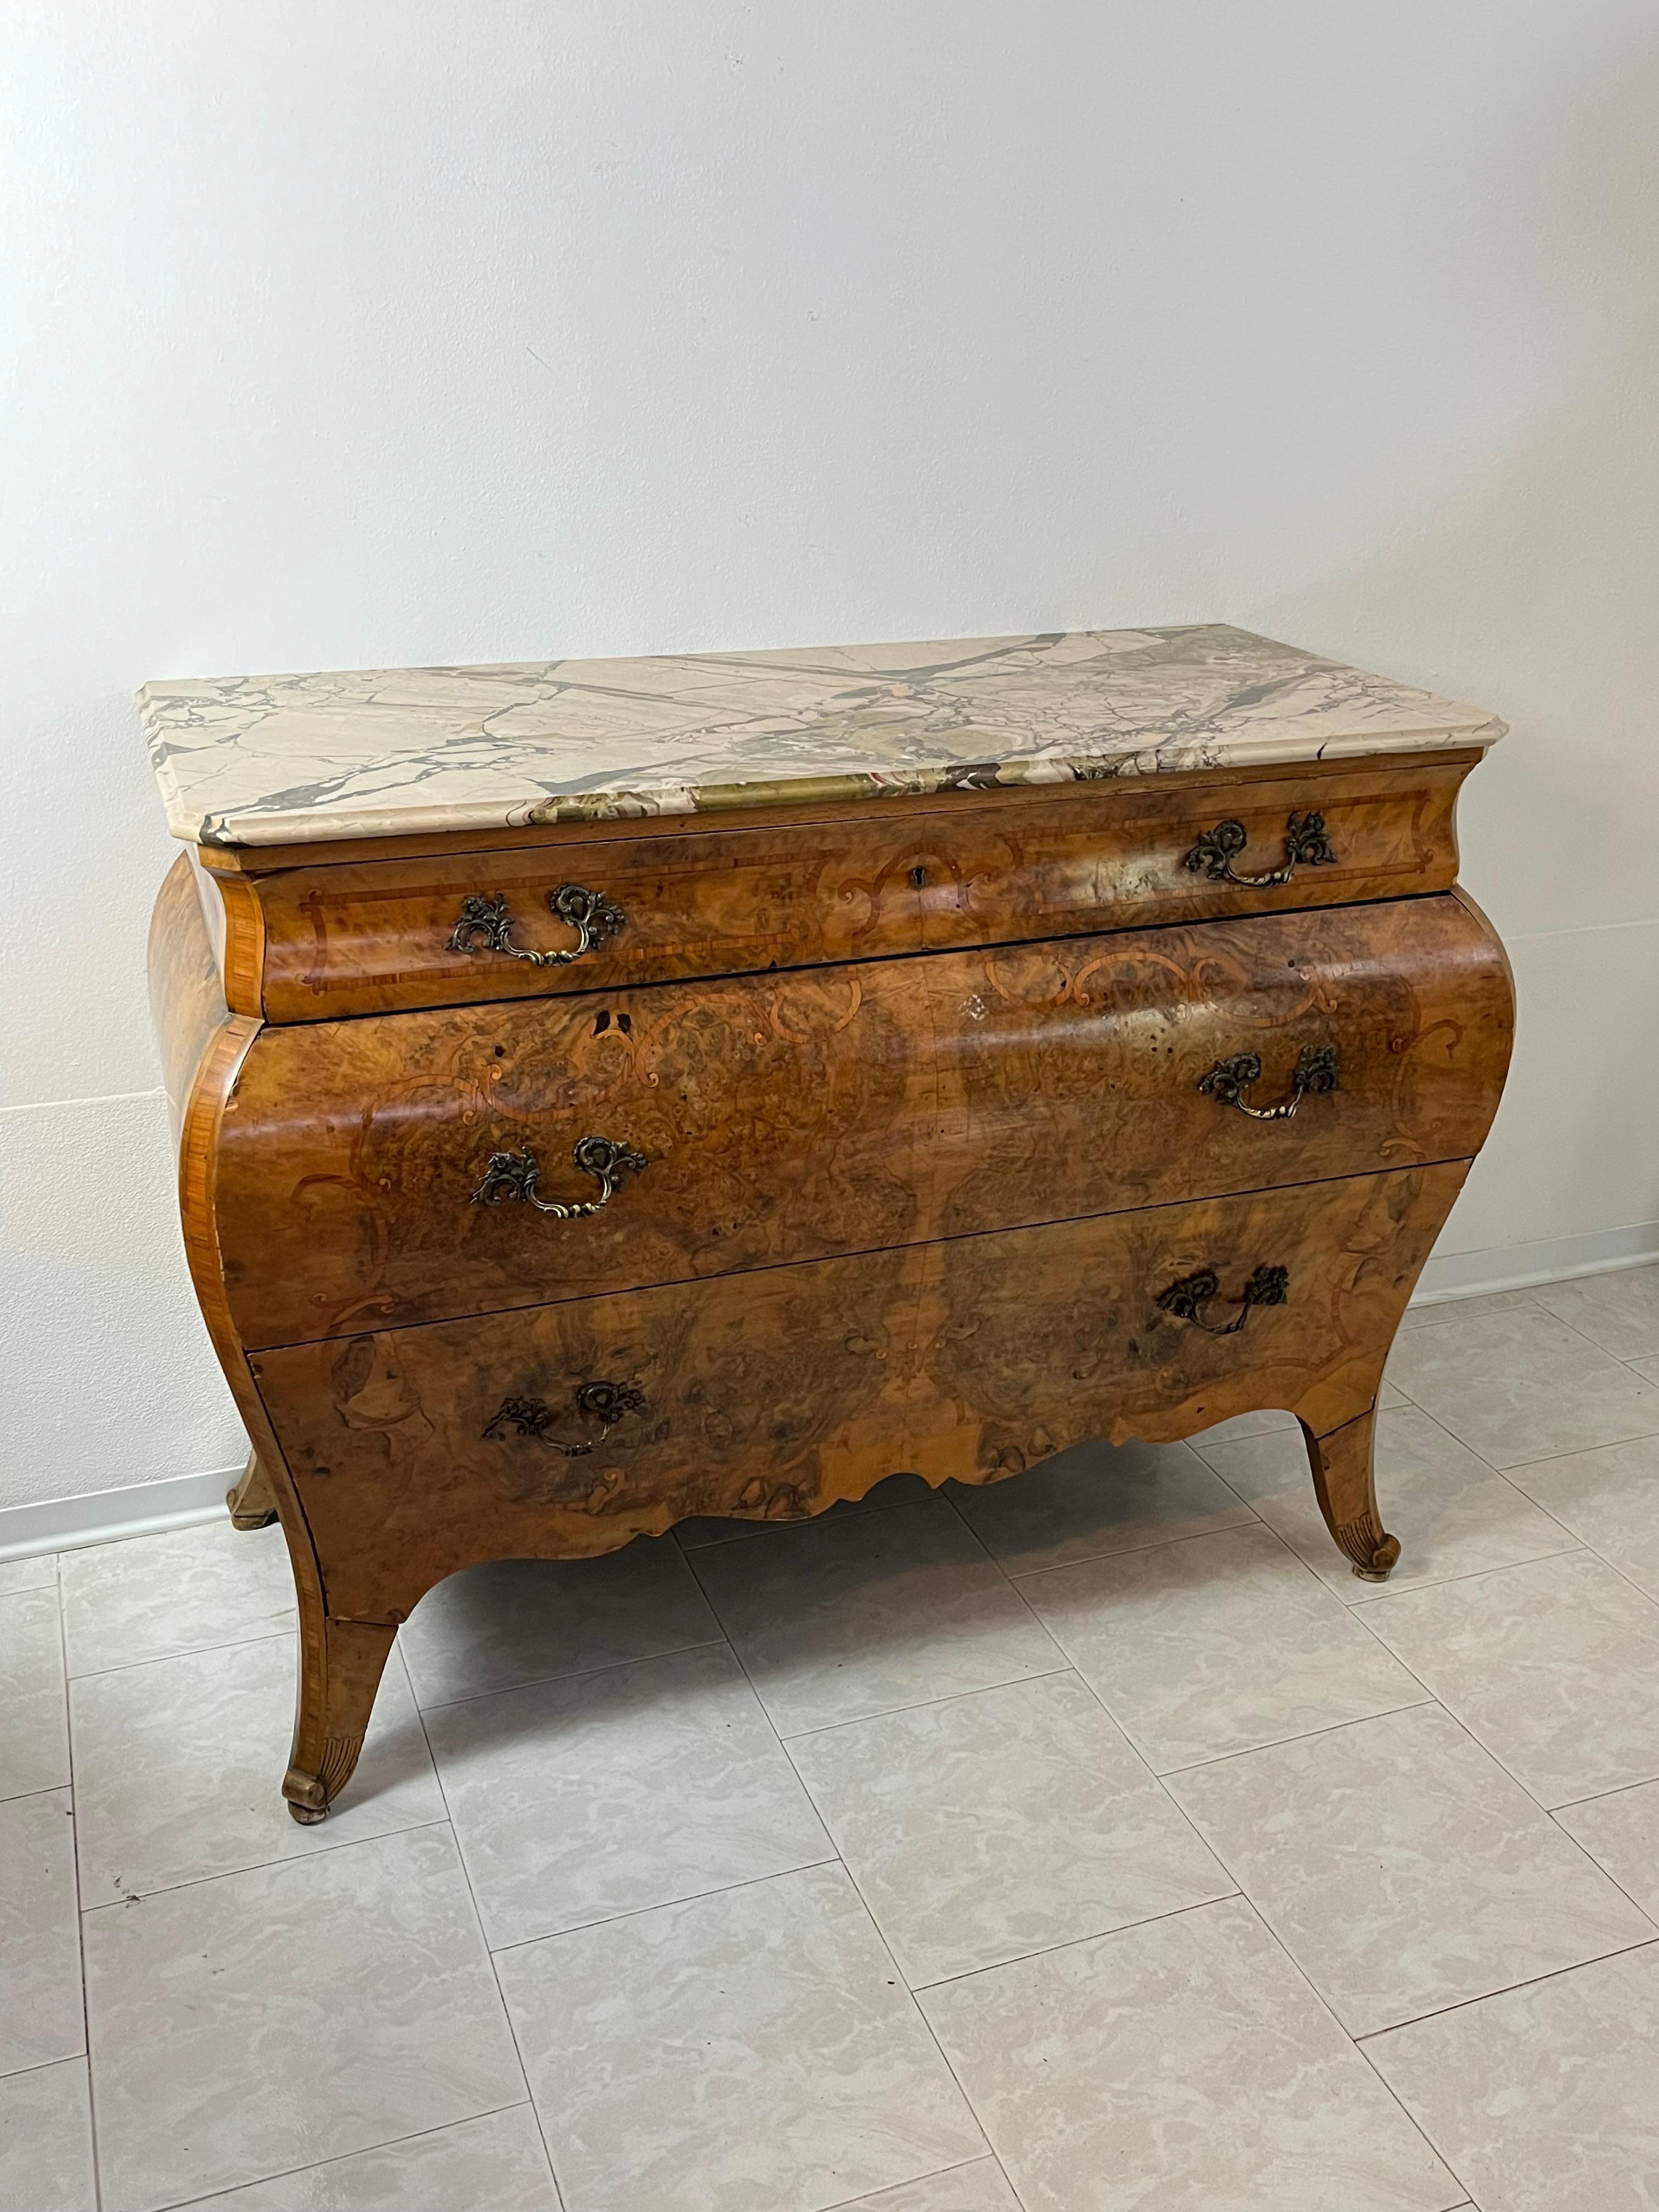 Sicilian wooden chest of drawers, marble top, 1930s
Found in a noble apartment in Palermo (Italy).
Rounded body, front with three drawers, saber legs and handles in cast and chiseled bronze.
Good condition, small signs of aging.